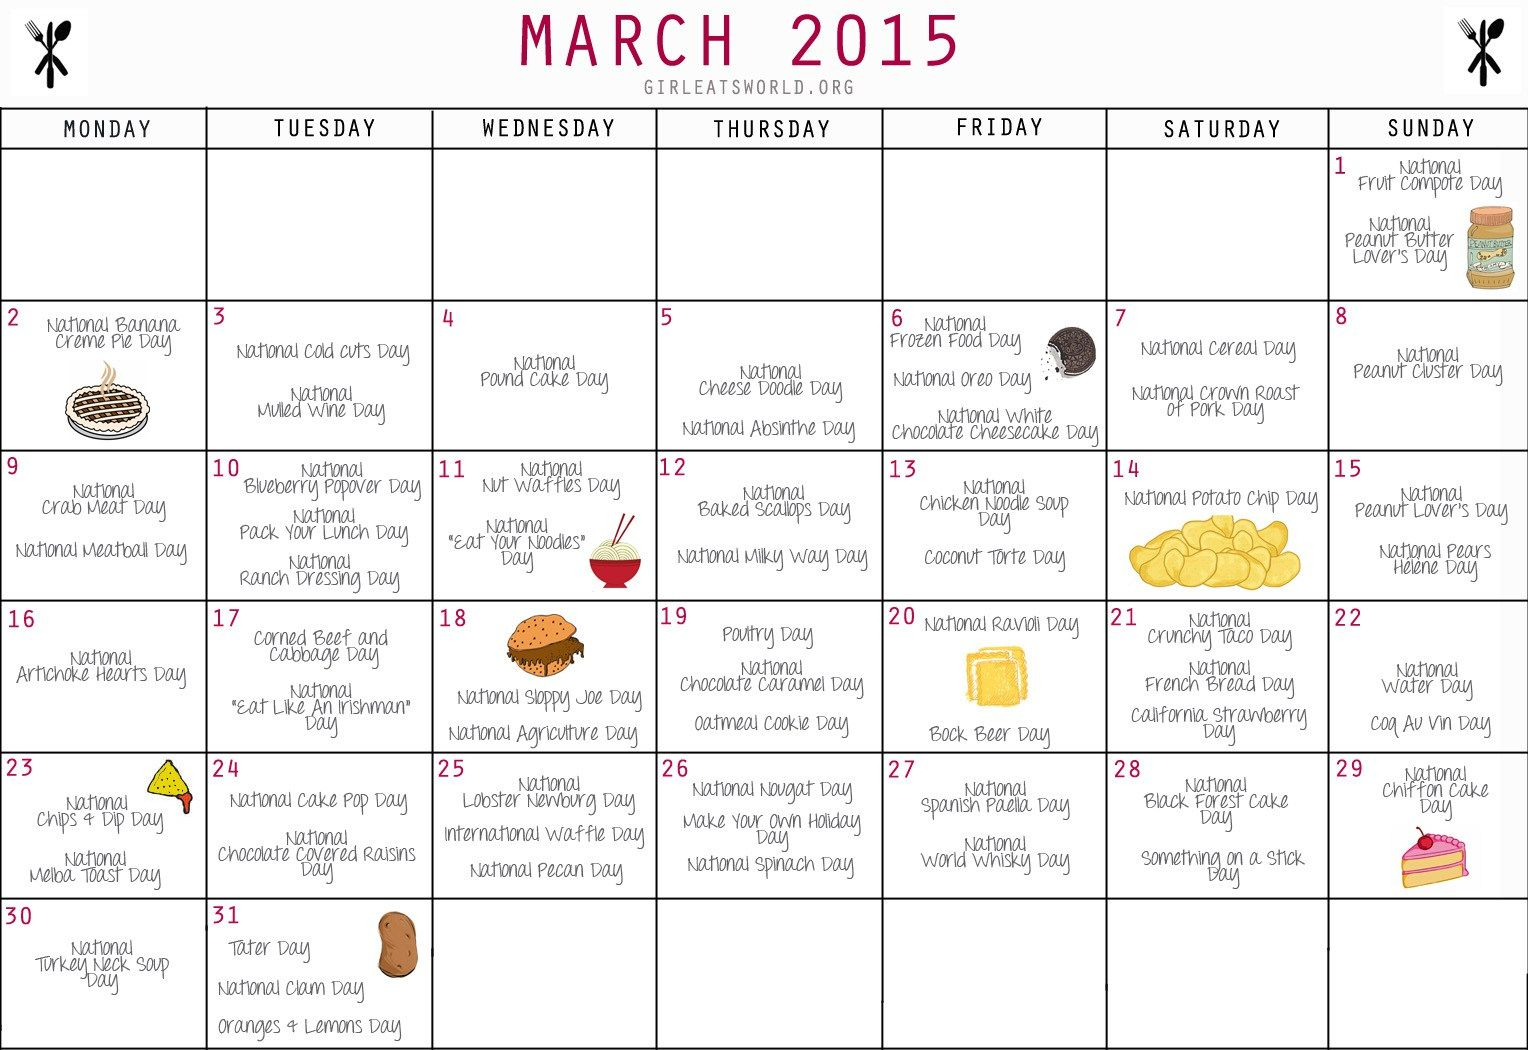 March Calendar | Every Day Is A Day To Celebrate Something